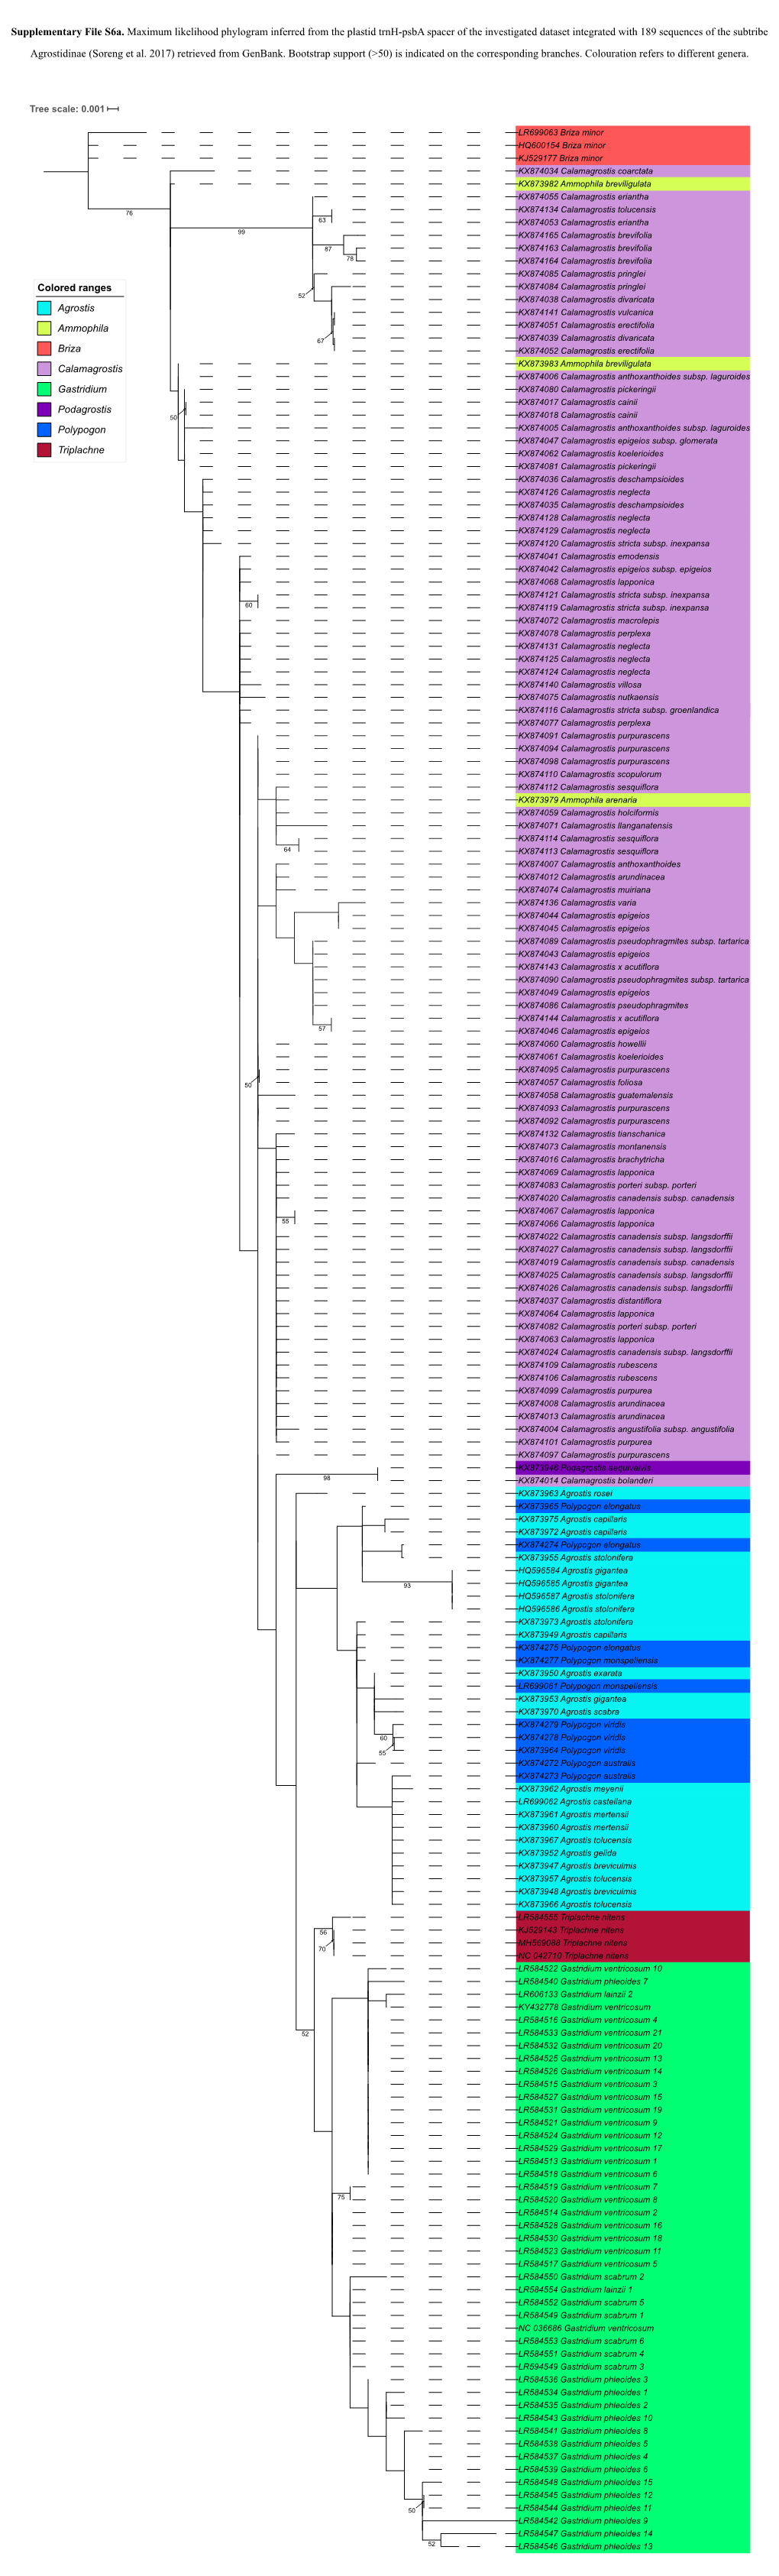 Supplementary File S6a. Maximum Likelihood Phylogram Inferred From